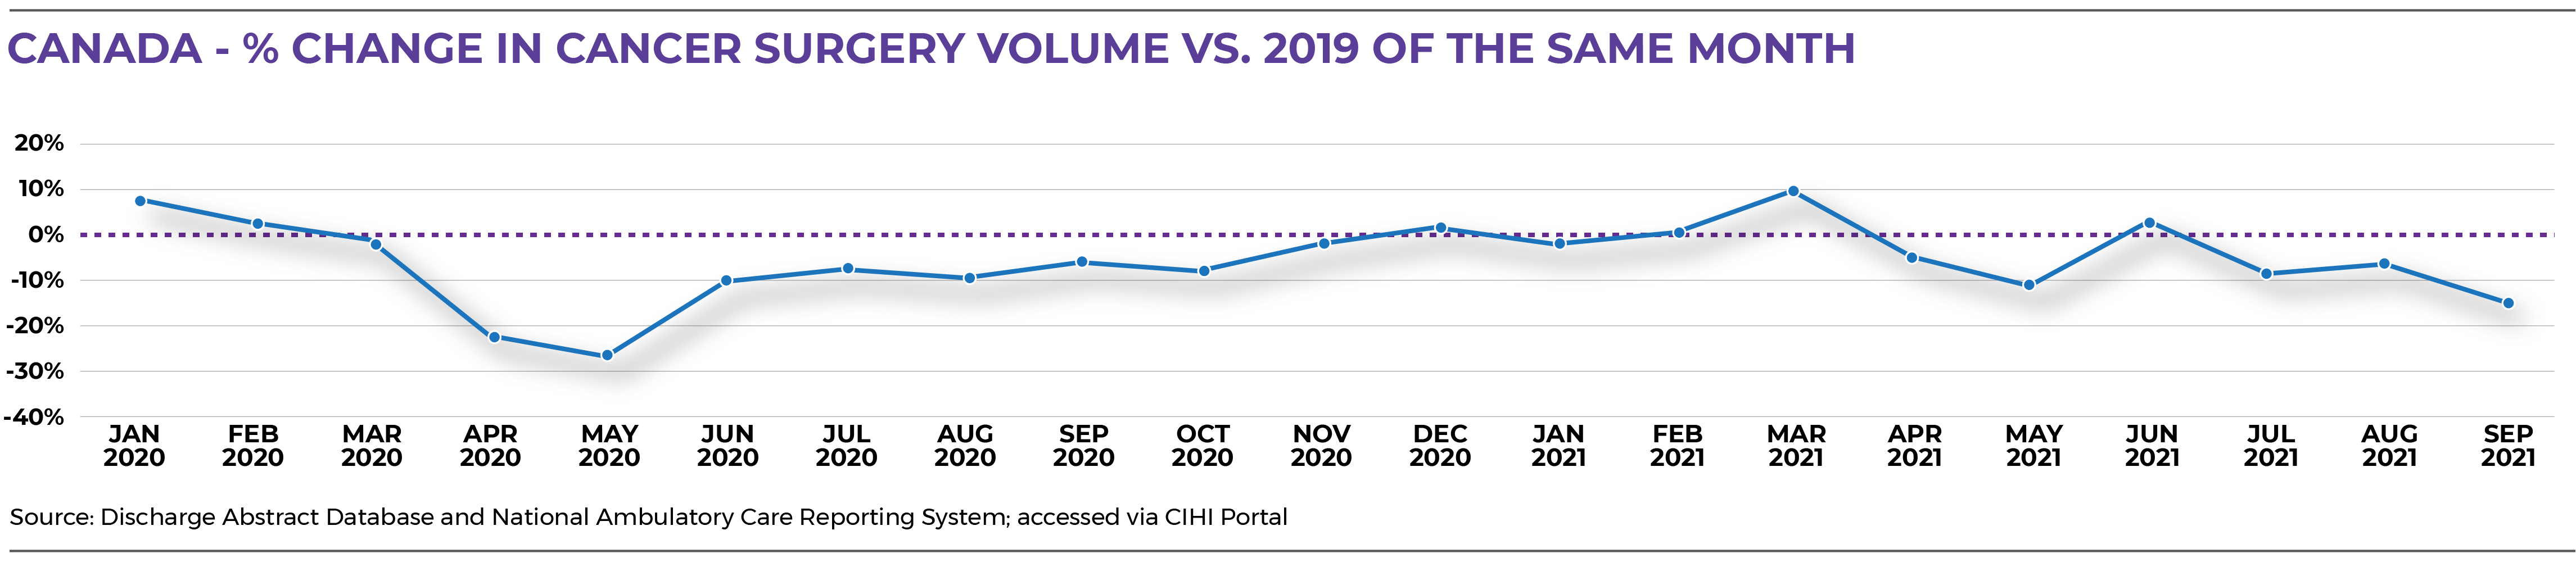 % CHANGE IN CANCER SURGERY VOLUME VS. 2019 OF THE SAME MONTH in Canada